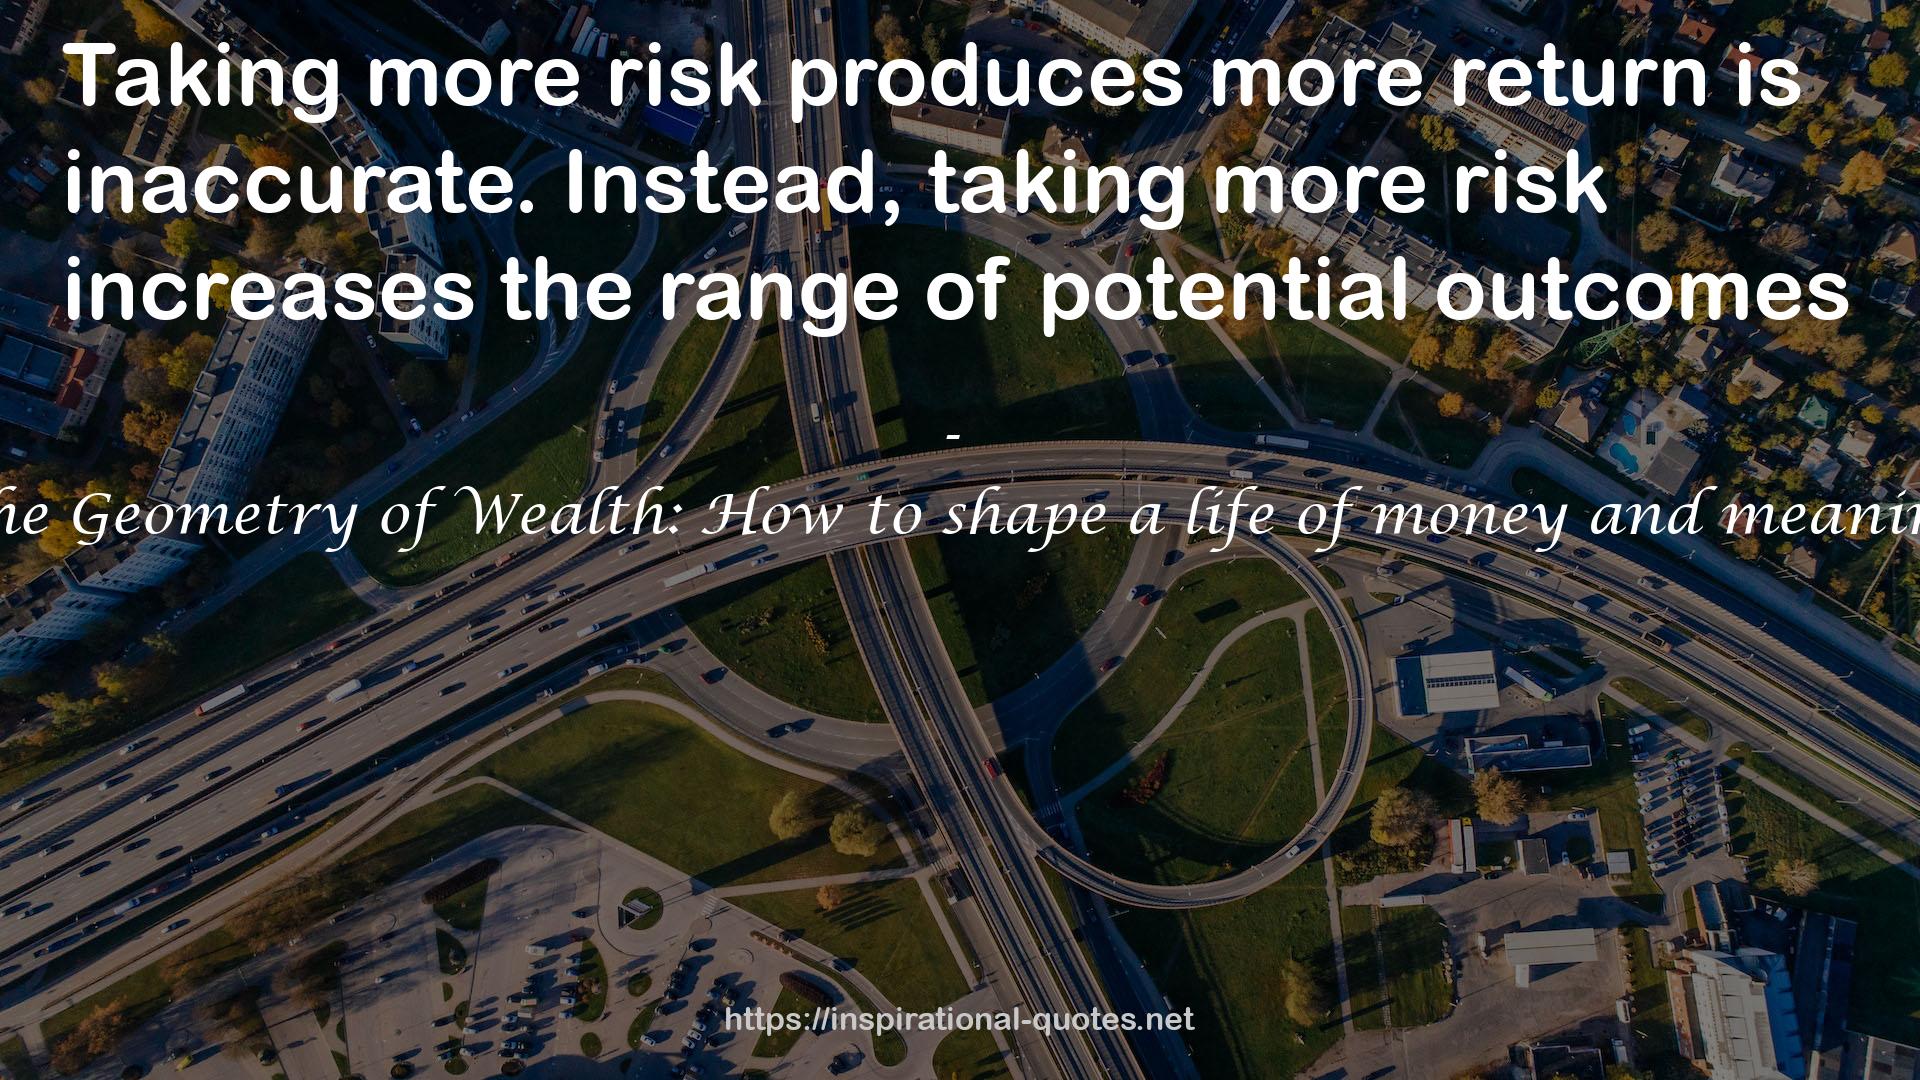 The Geometry of Wealth: How to shape a life of money and meaning QUOTES